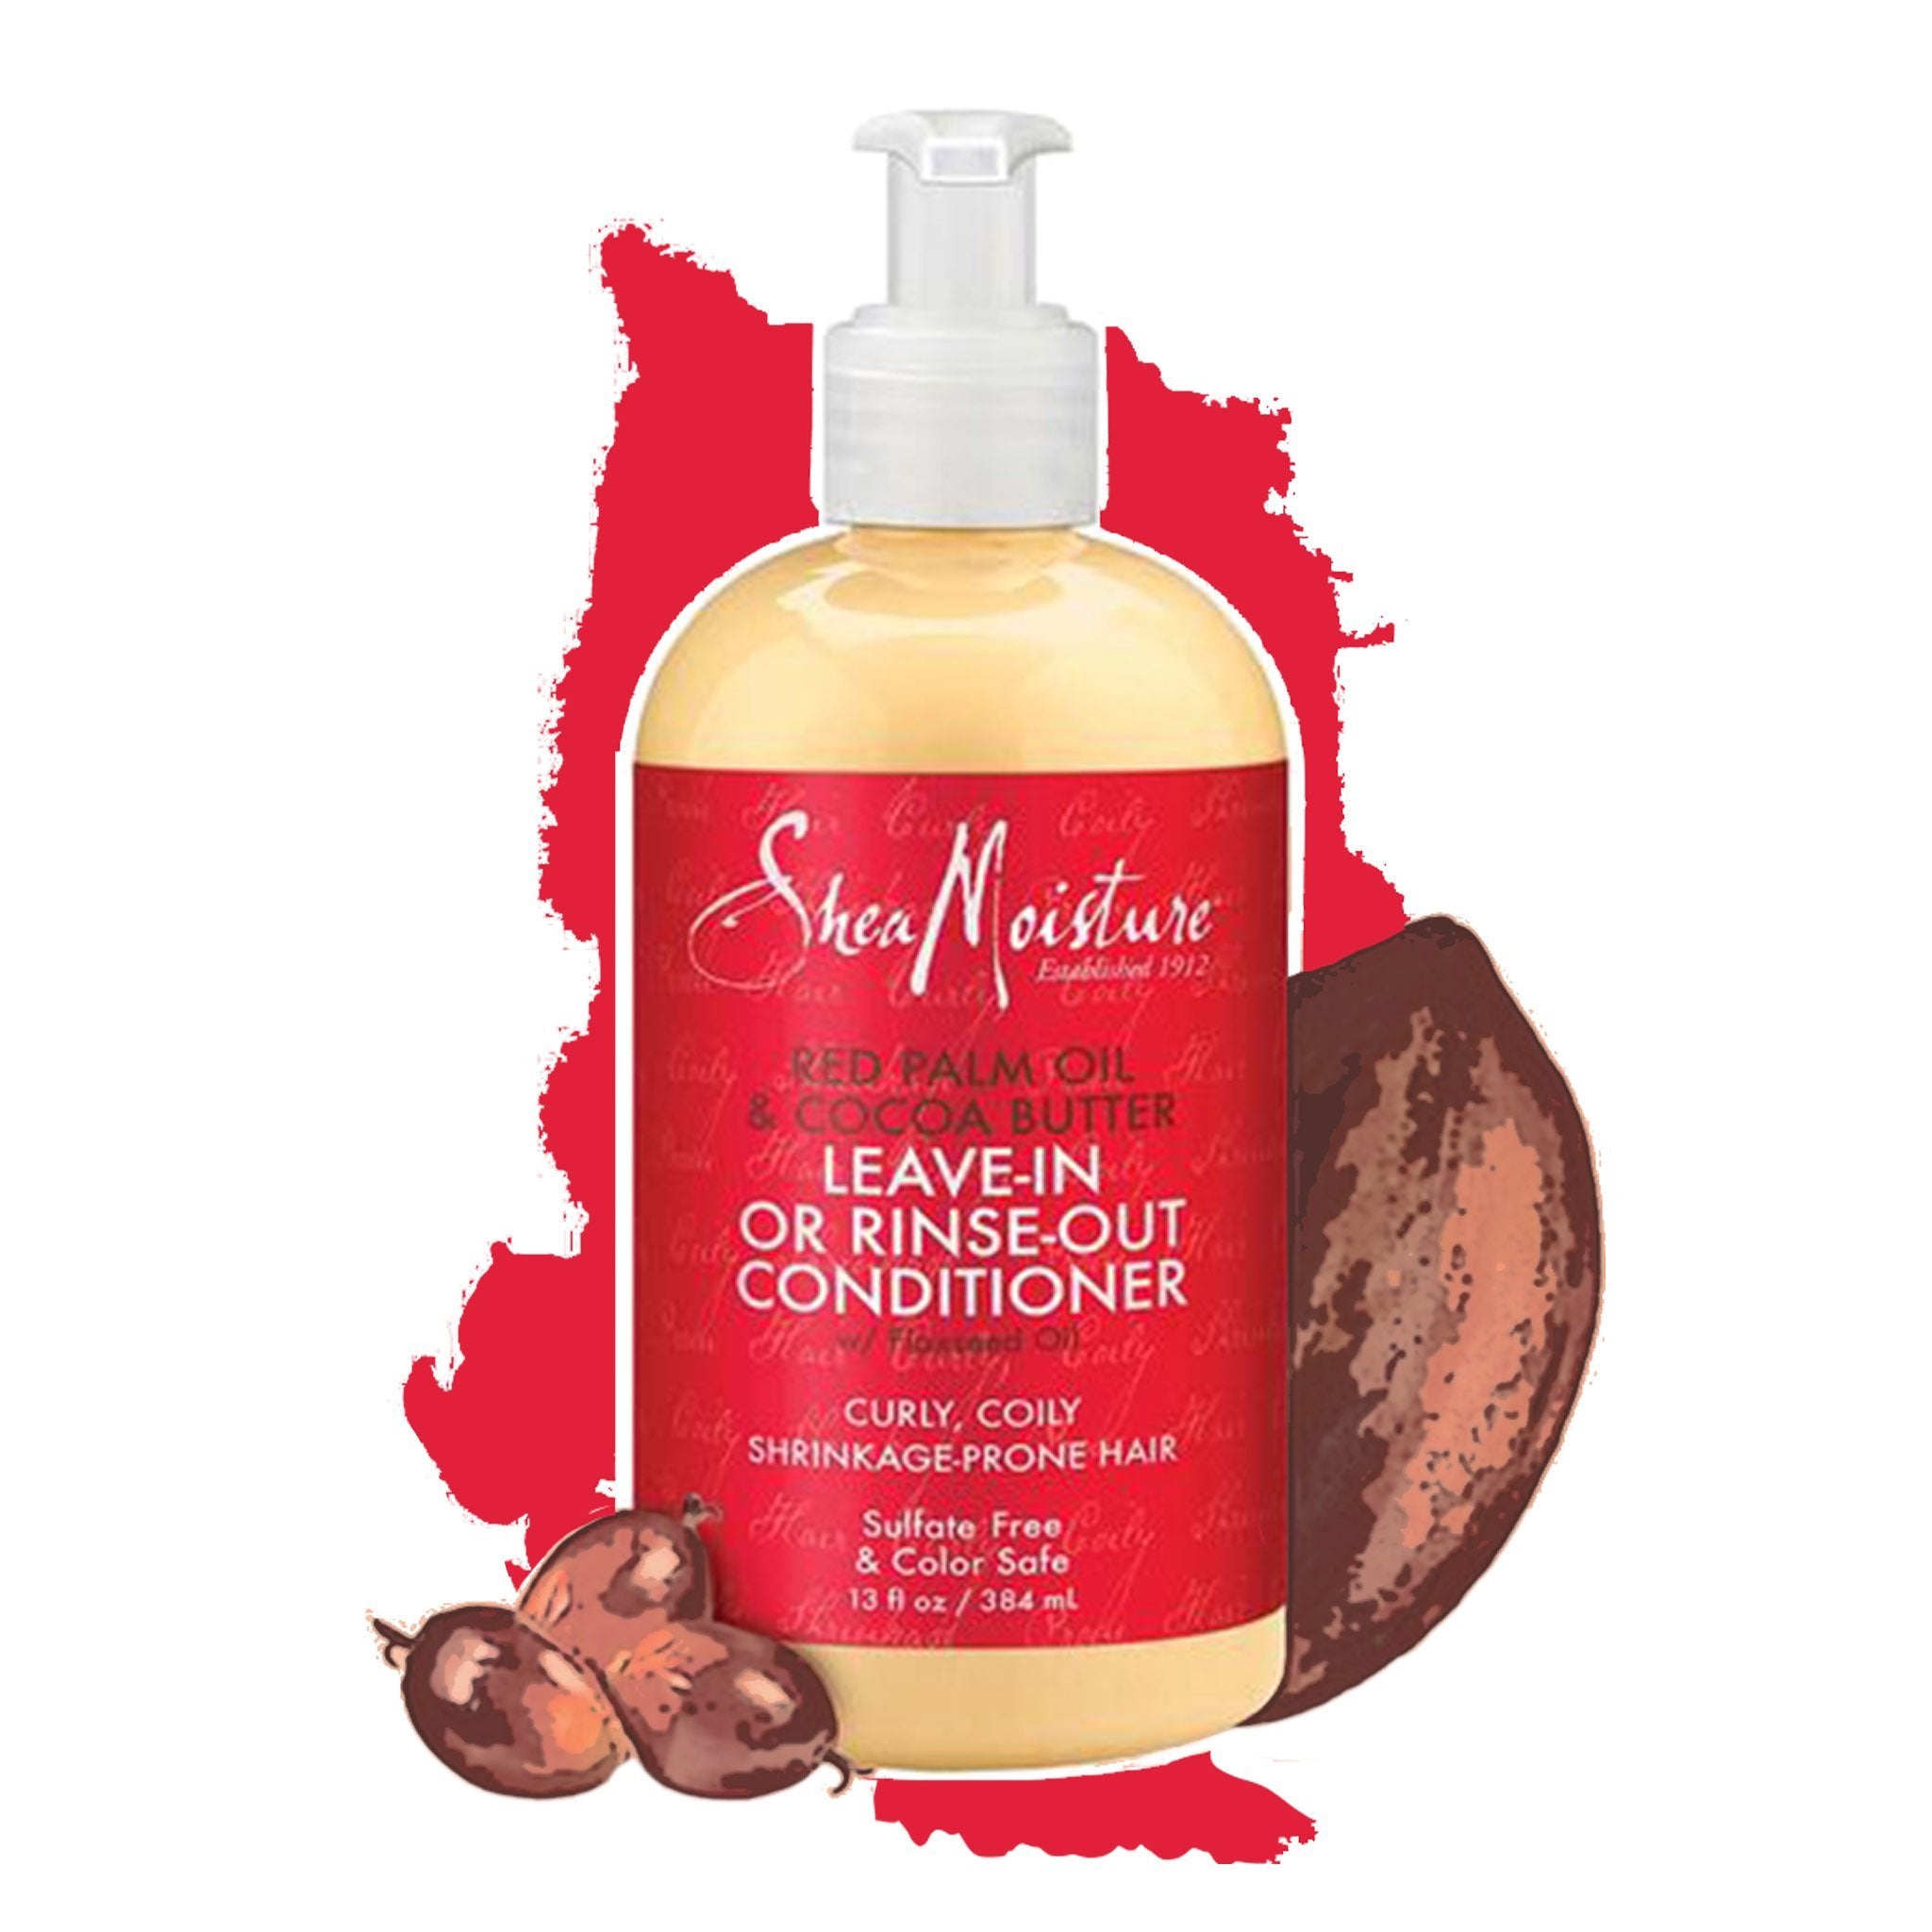 Shea Moisture | RED PALM OIL & COCOA BUTTER RINSE OUT OR LEAVE IN CONDITIONER - lockenkopf